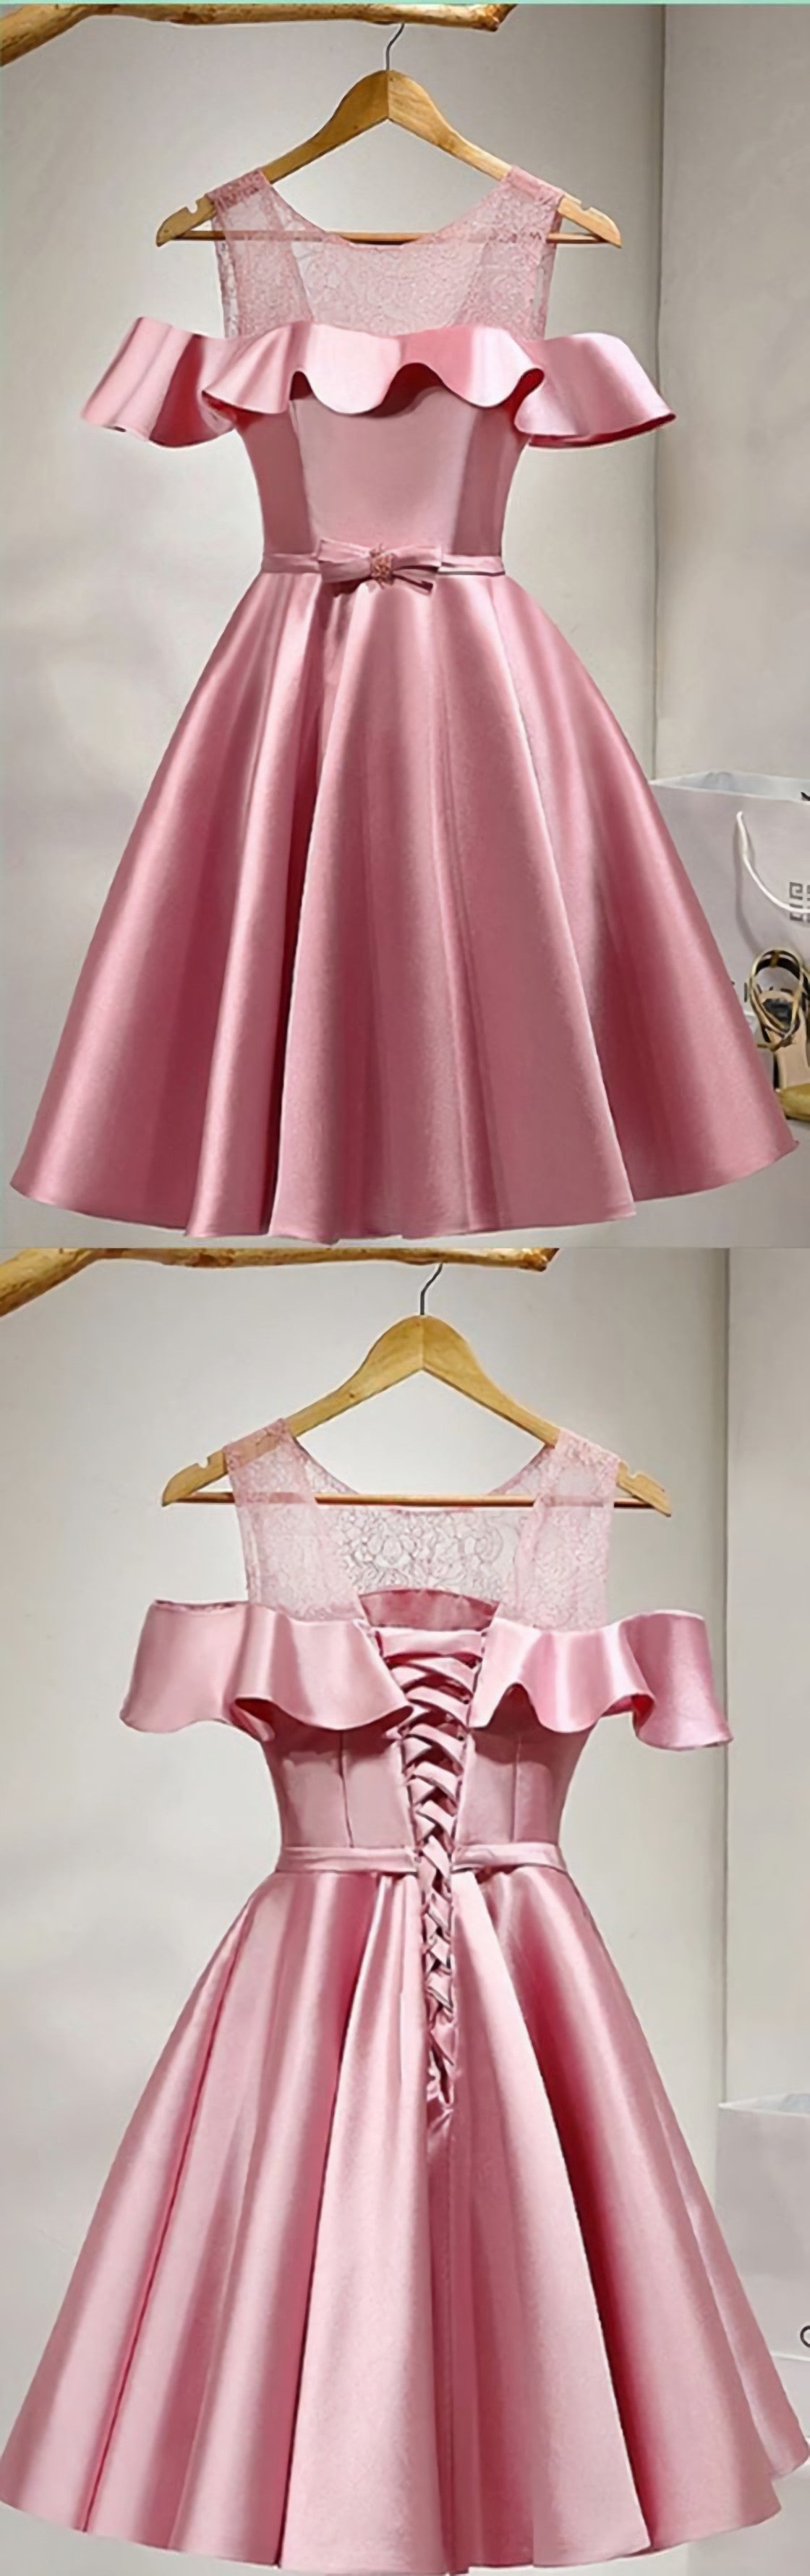 Bridesmaids Dresses With Lace, Pink Lace Up Satin Simpe Cheap Short Short Prom Dresses